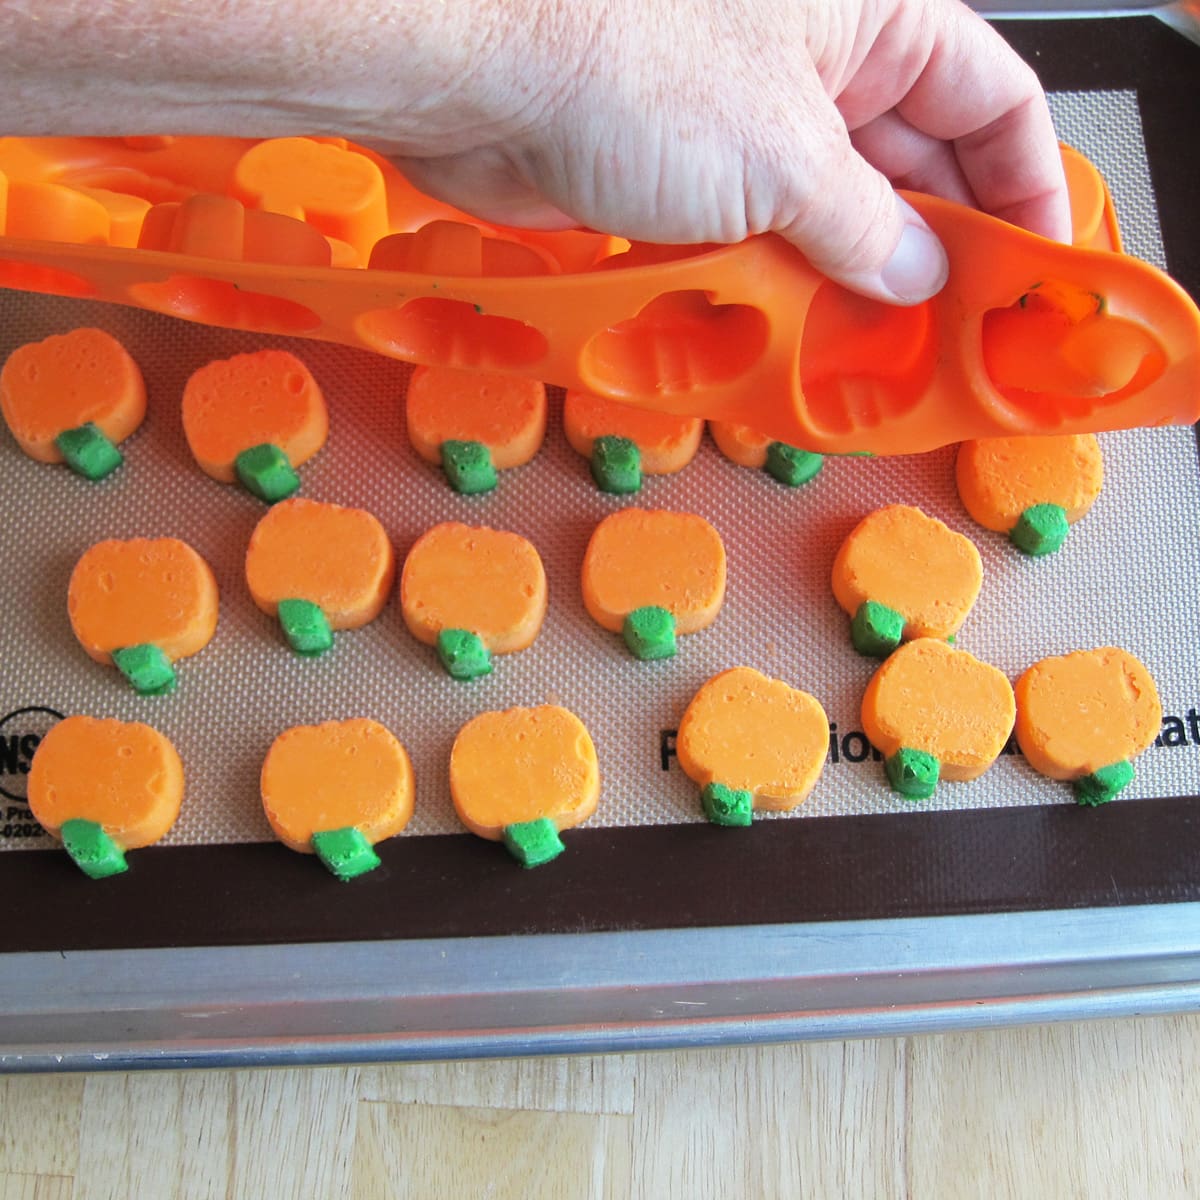 unmolding orange and green pumpkin cheesecakes from a silicone mold onto a silicone mat on a baking sheet.